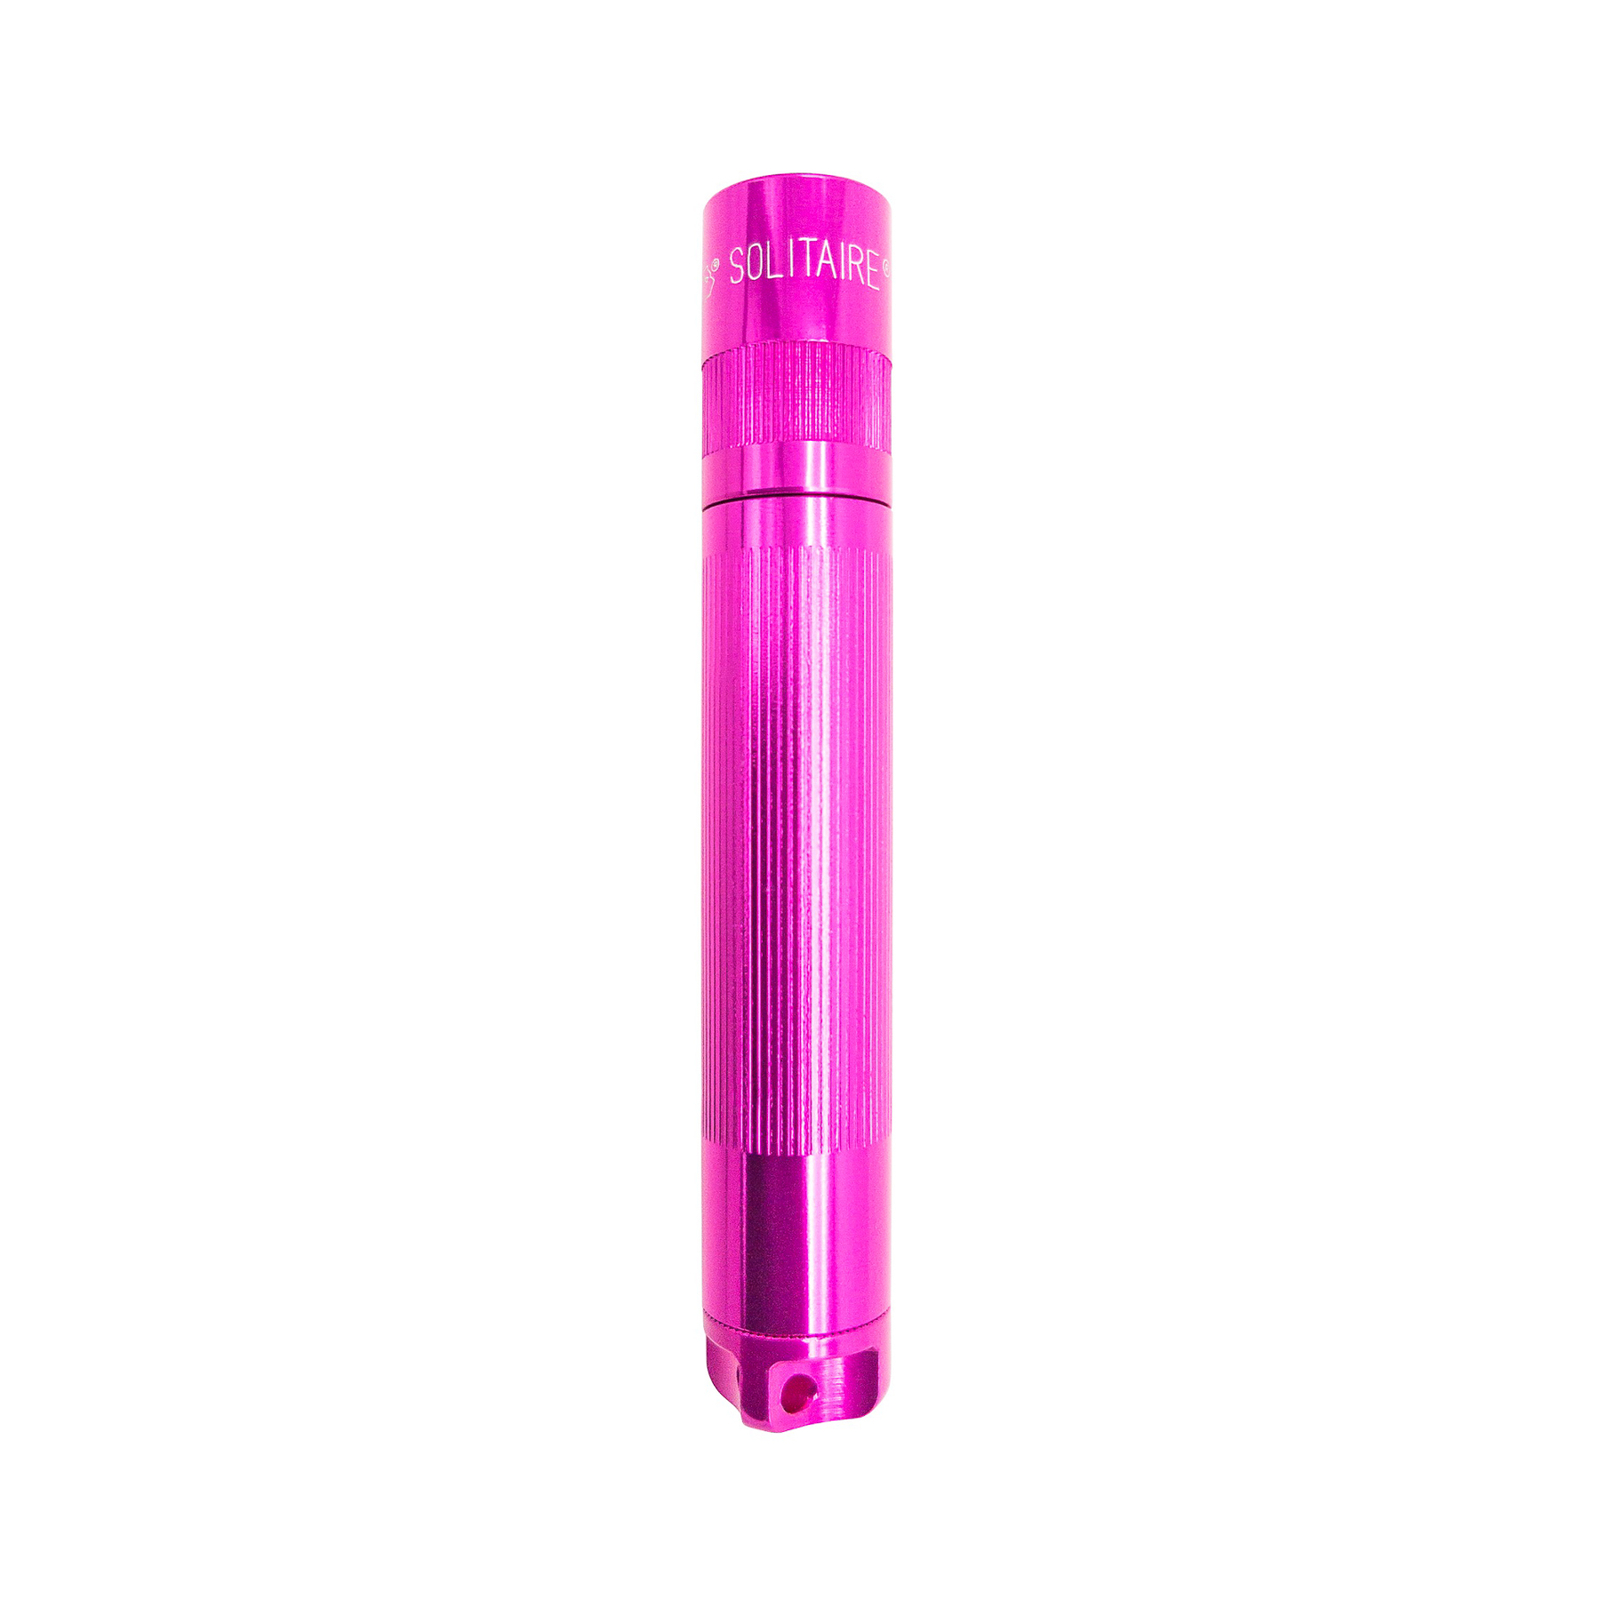 Torcia a LED Maglite Solitaire, 1 Cell AAA, rosa